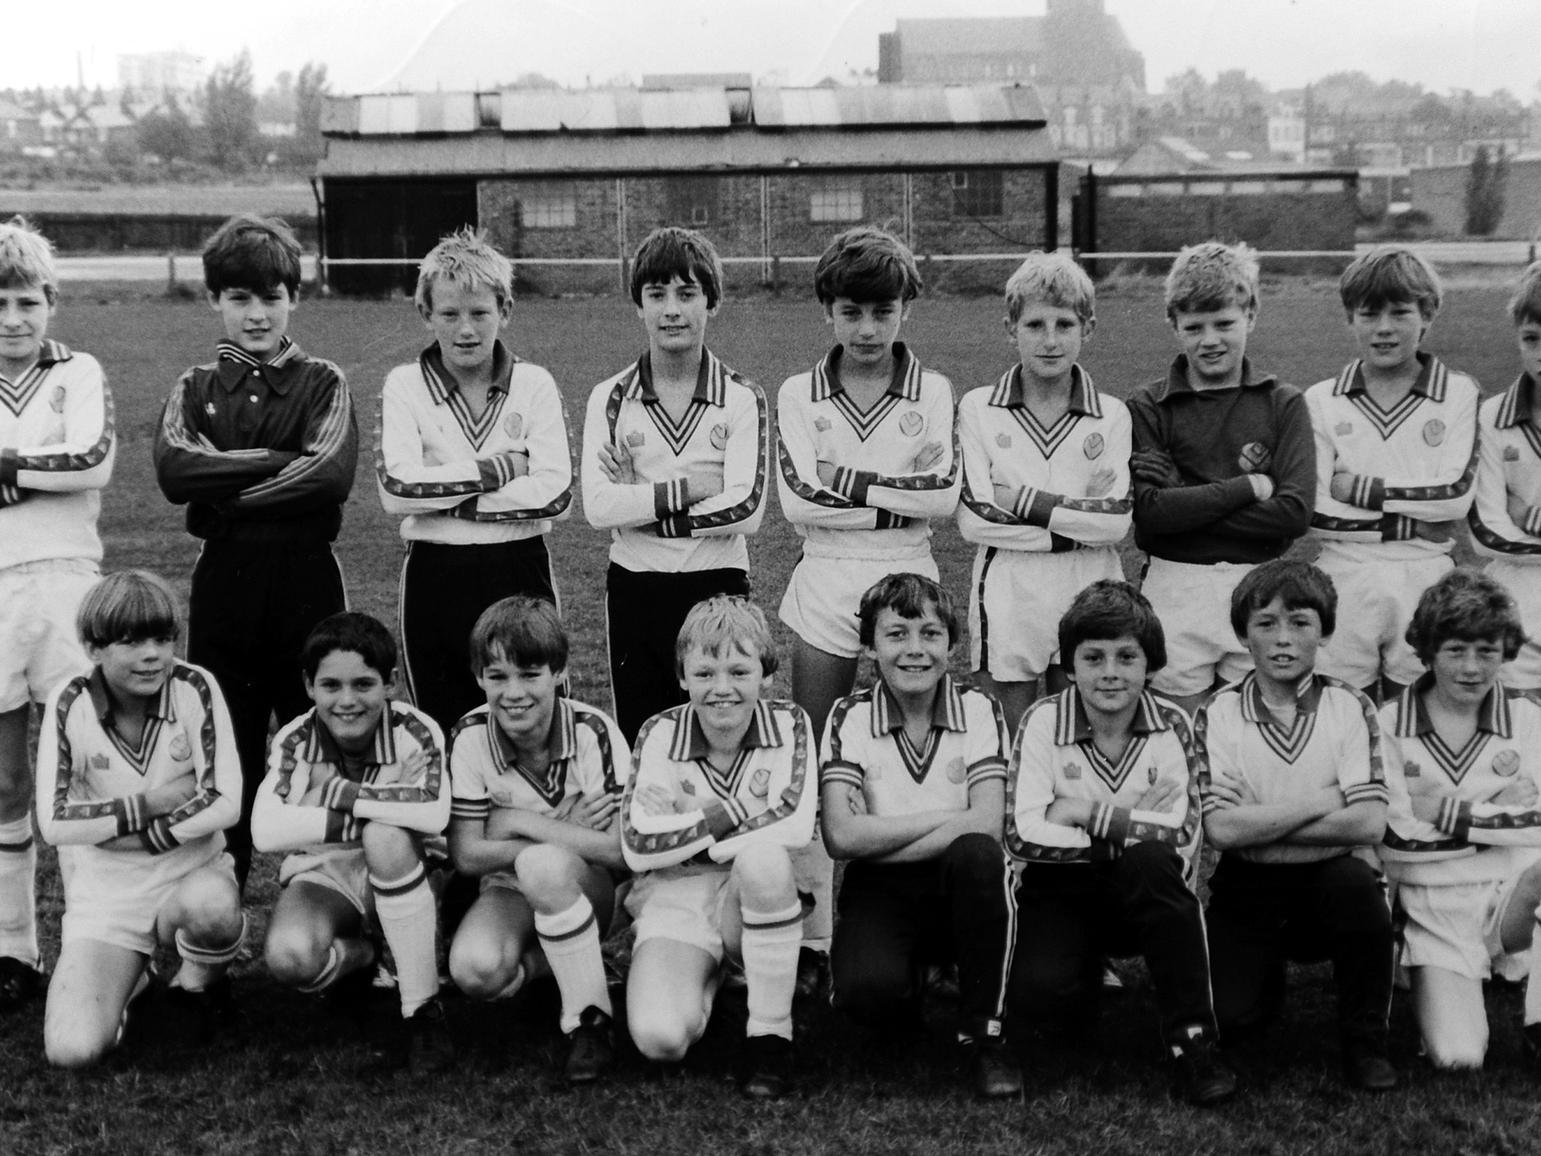 Do you recognise anyone in this photo taken in October 1983?